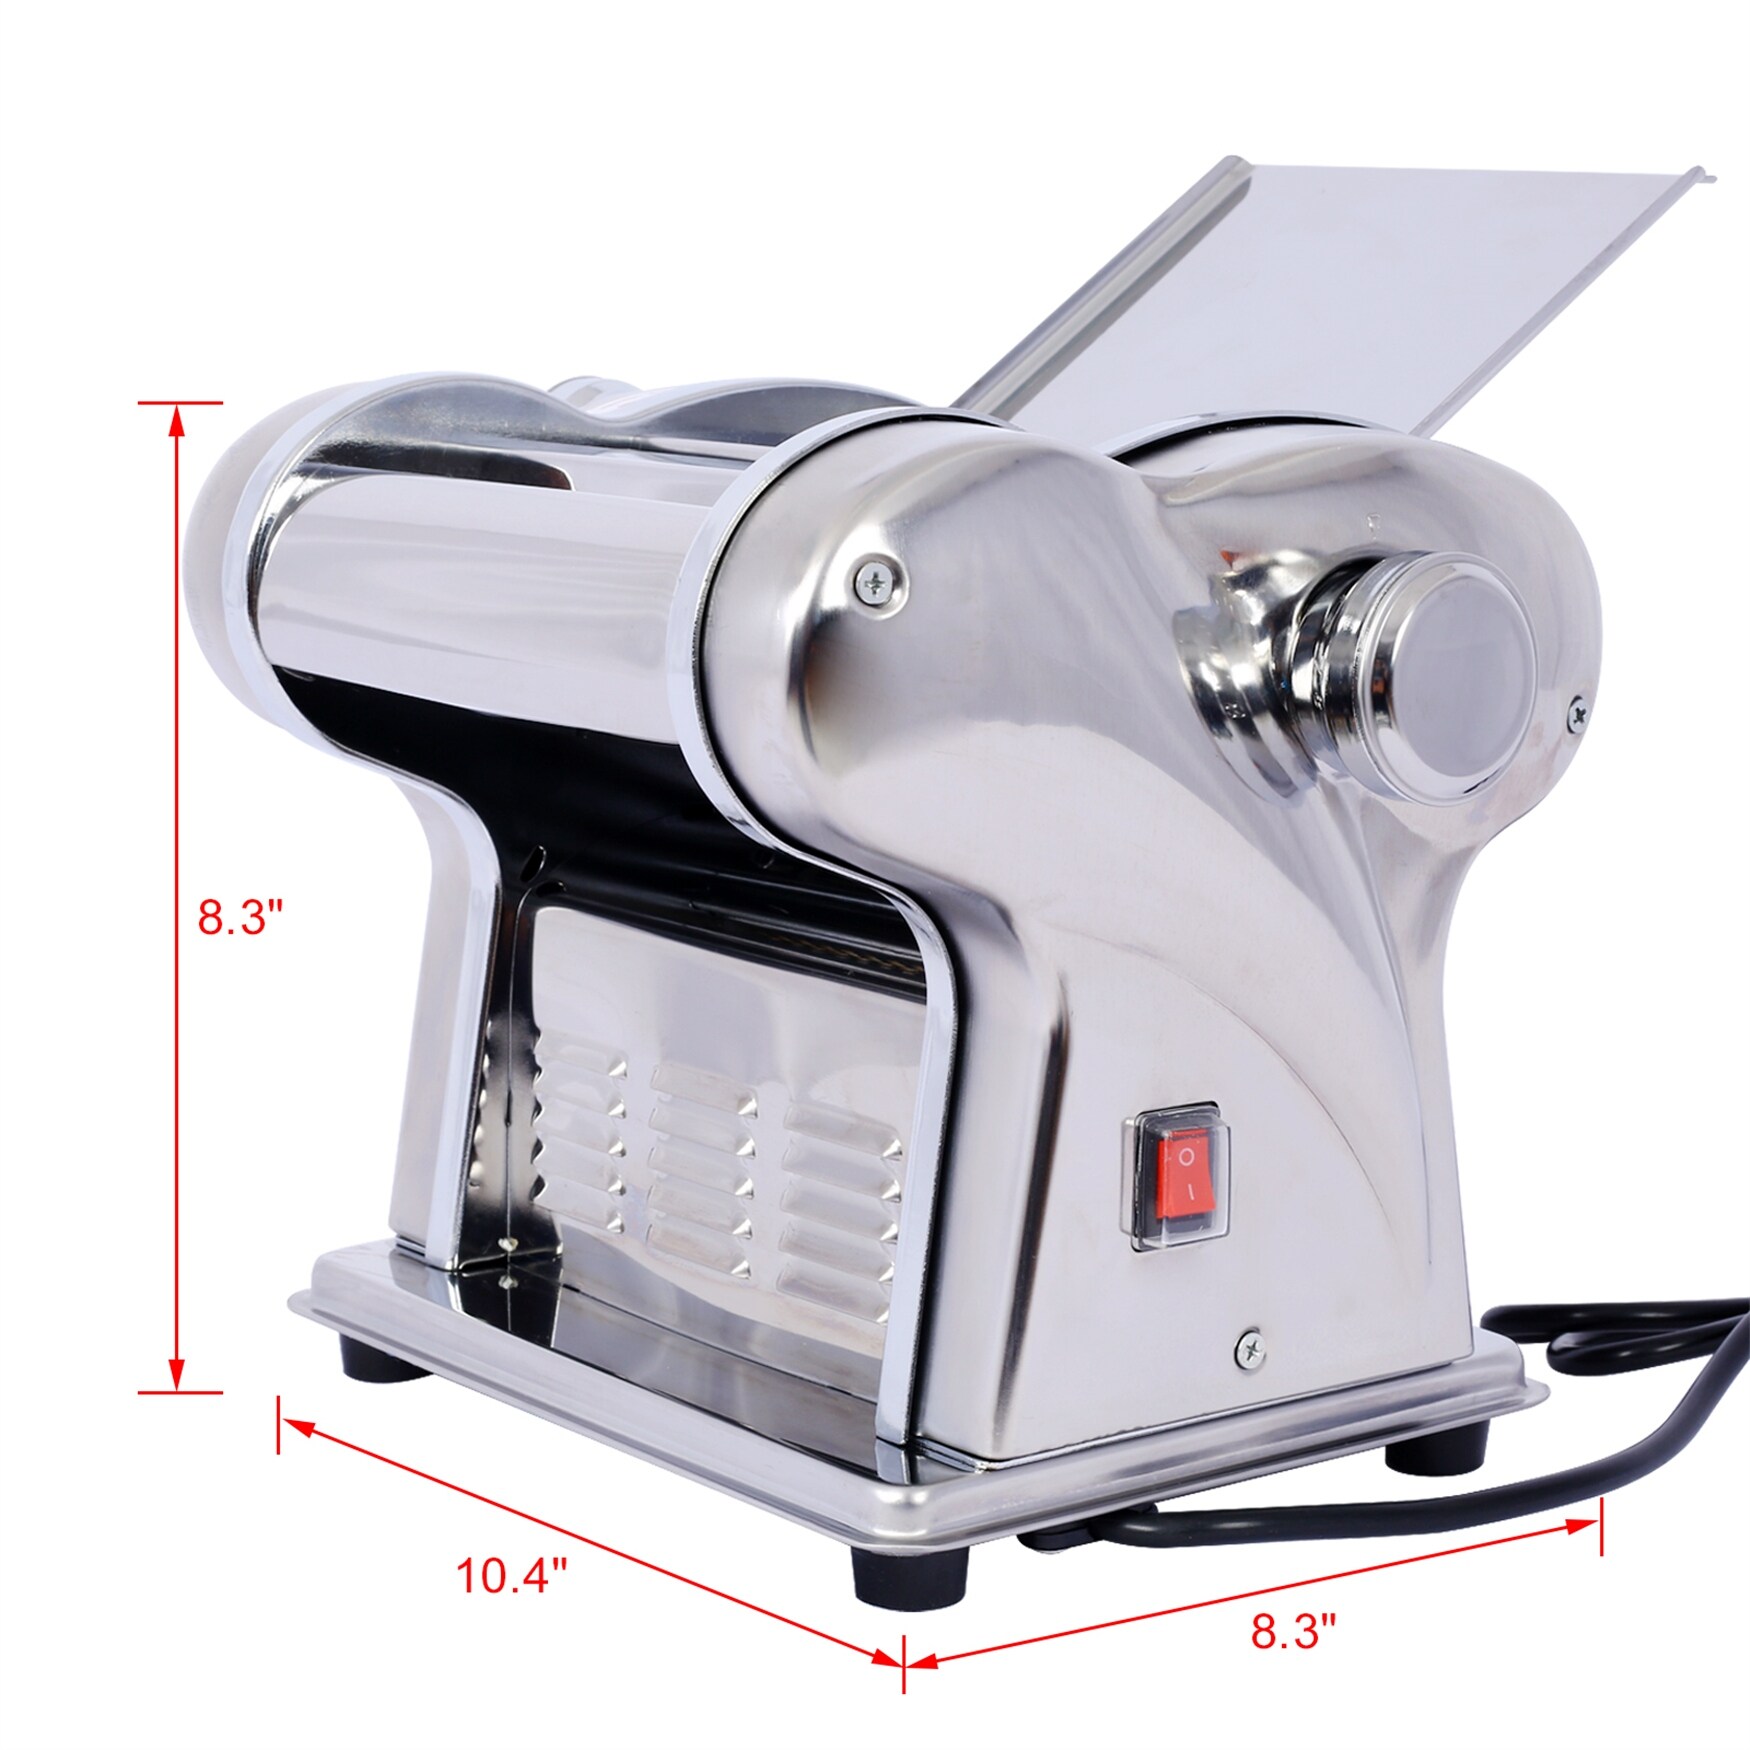 https://ak1.ostkcdn.com/images/products/is/images/direct/3d05b74f17714c57cfae981d178caf618410aba4/Electric-Pasta-Thickness-Adjustable-Stainless-Steel-Maker-Noodle.jpg